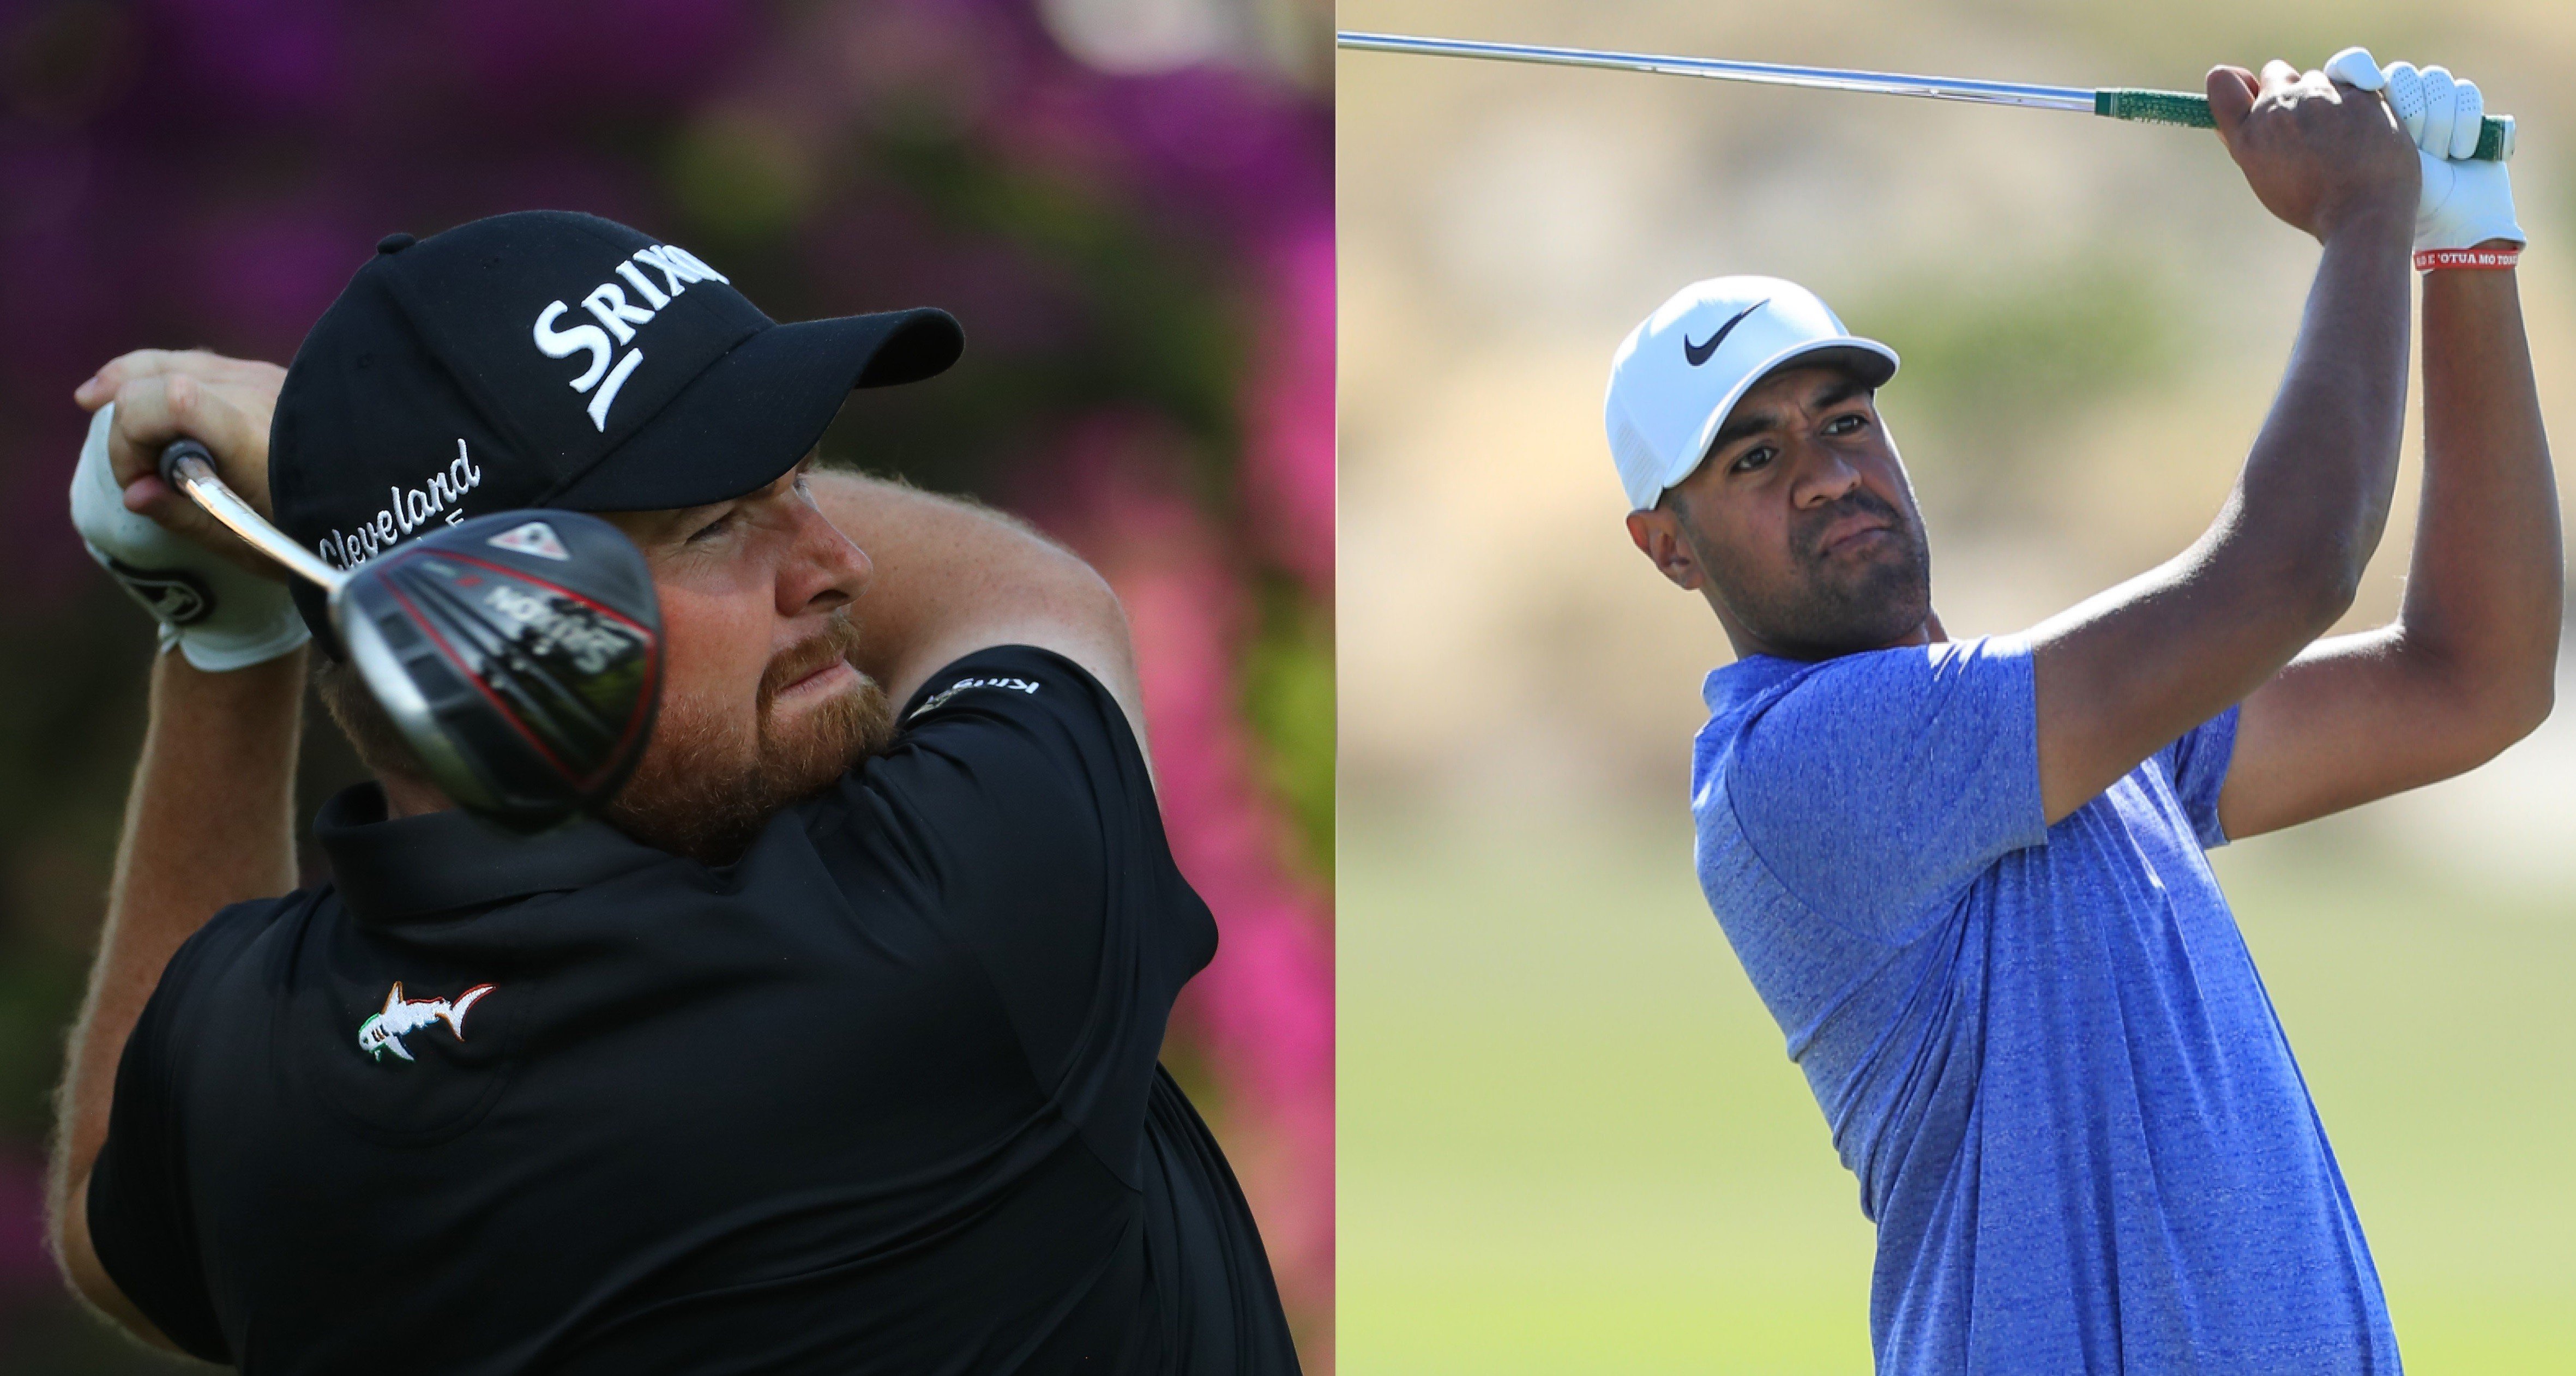 Shane Lowry and Tony Finau bring a wealth of experience and form to Hong Kong. Photo: Getty Images